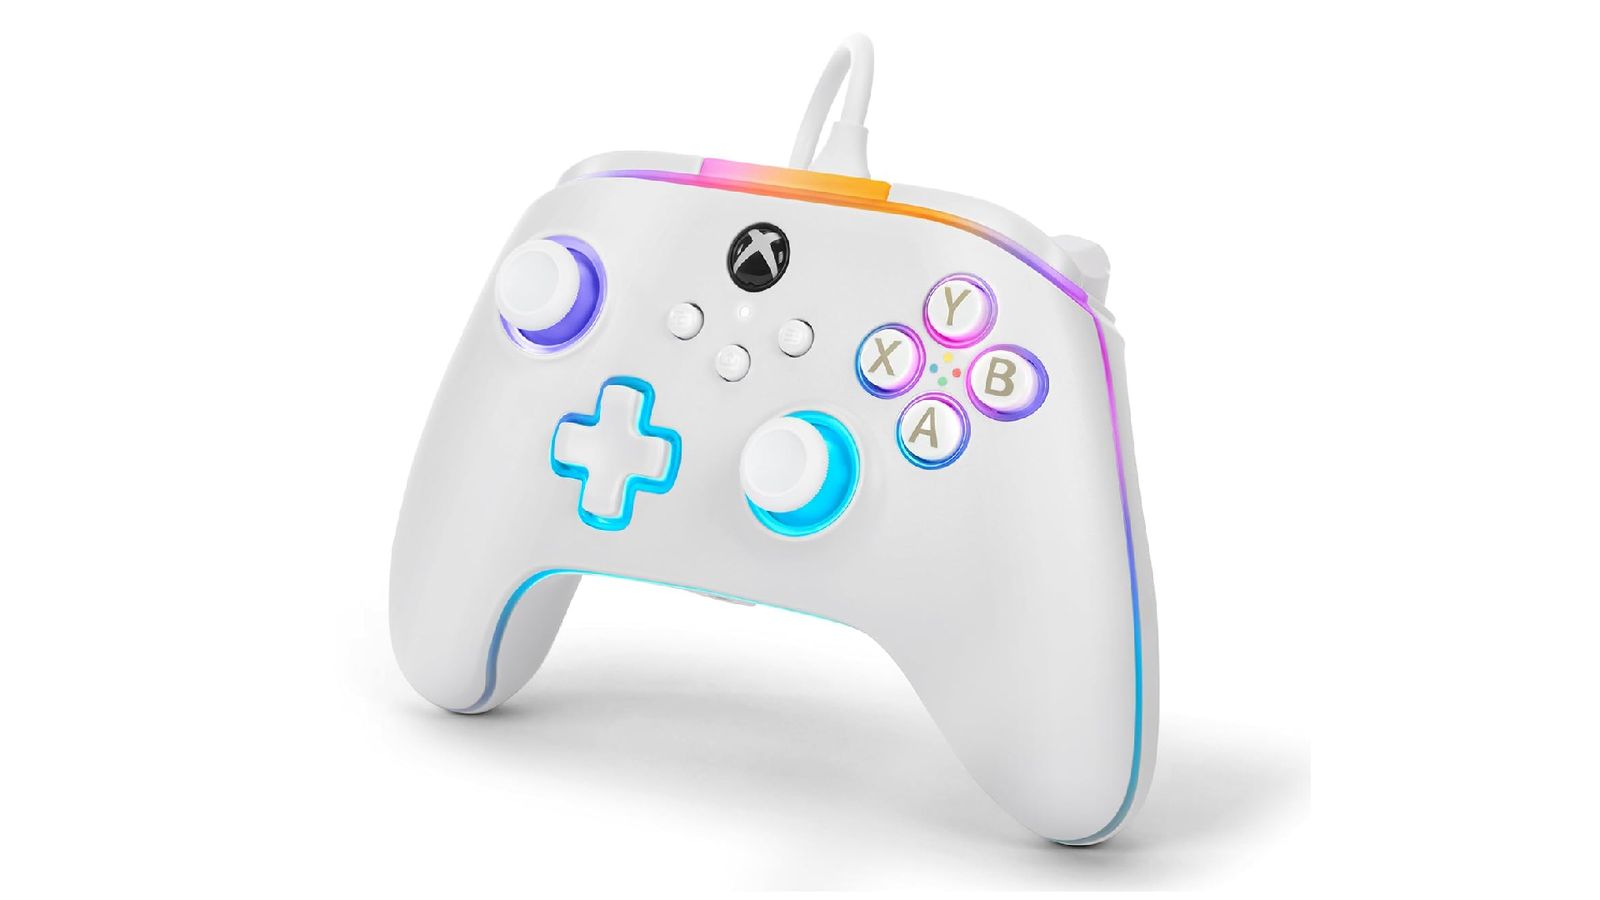 PowerA Advantage Lumectra product image of a white wired controller featuring multicoloured lighting around all of the buttons.